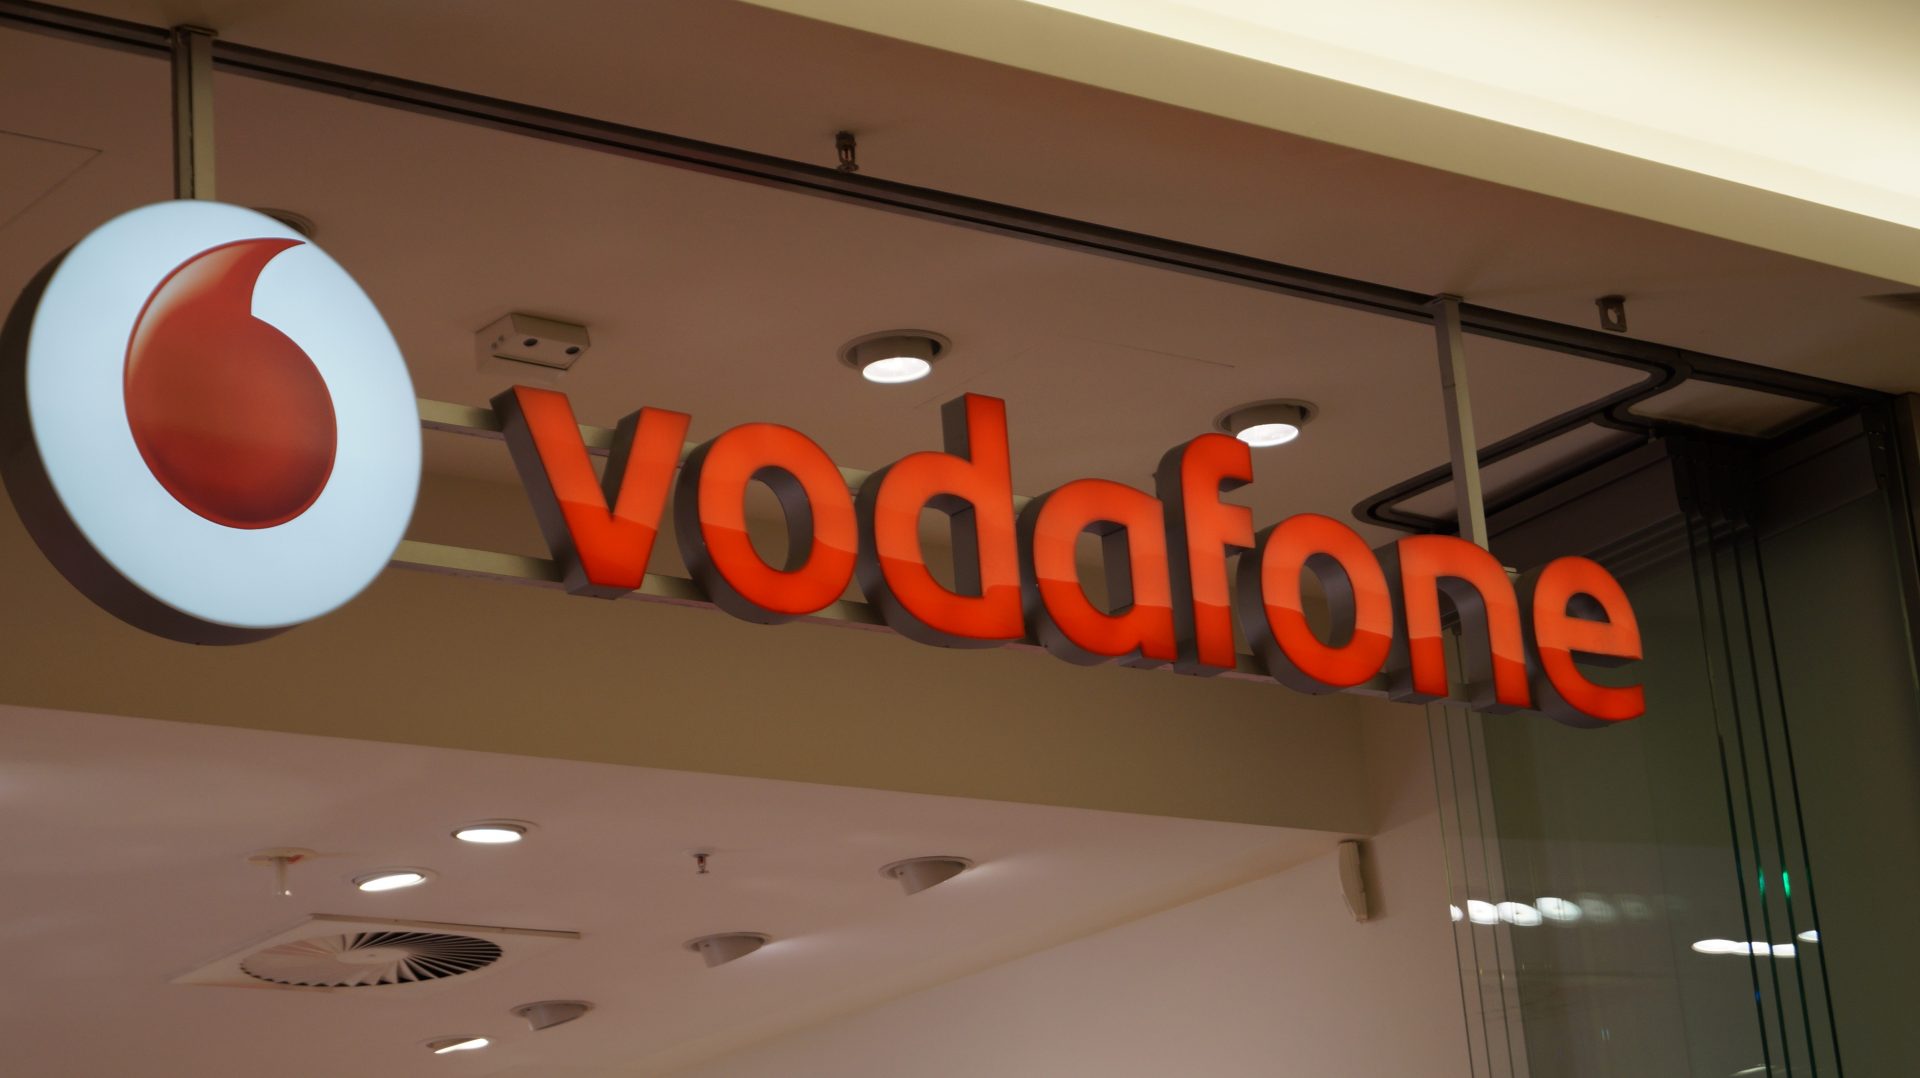 Vodafone store front sign